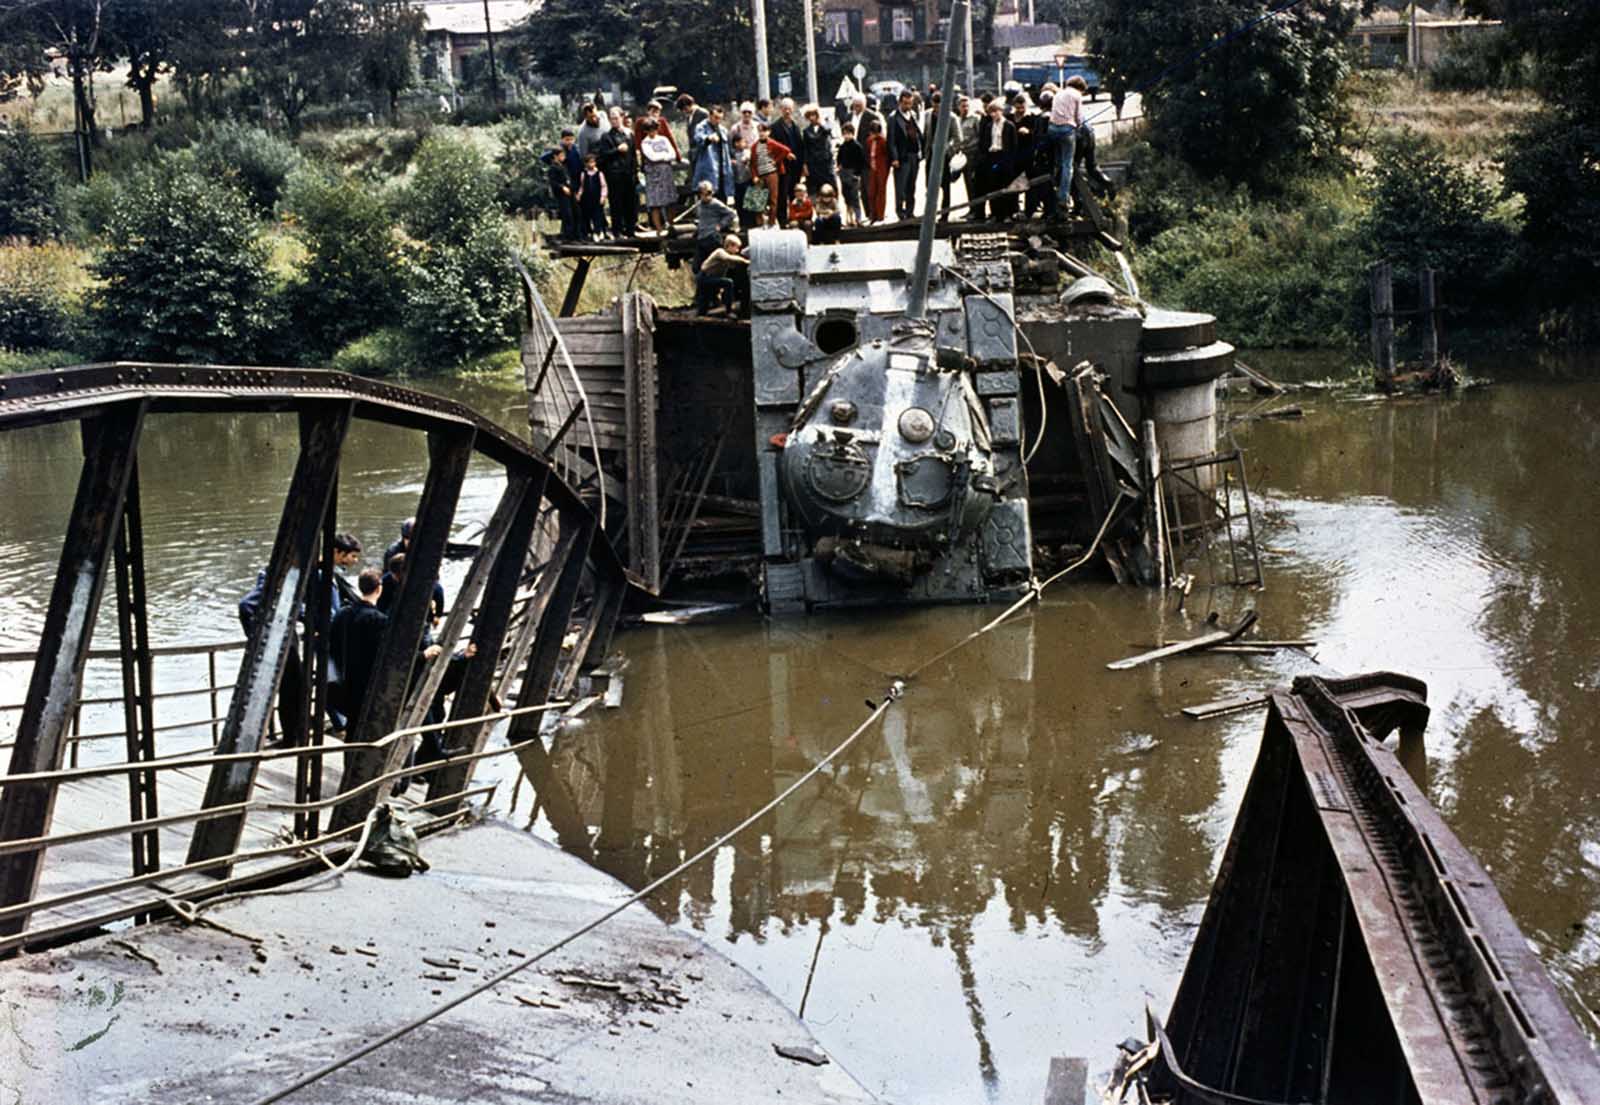 A Soviet tank is out of action after a bridge it was crossing gave way on August 21, 1968.